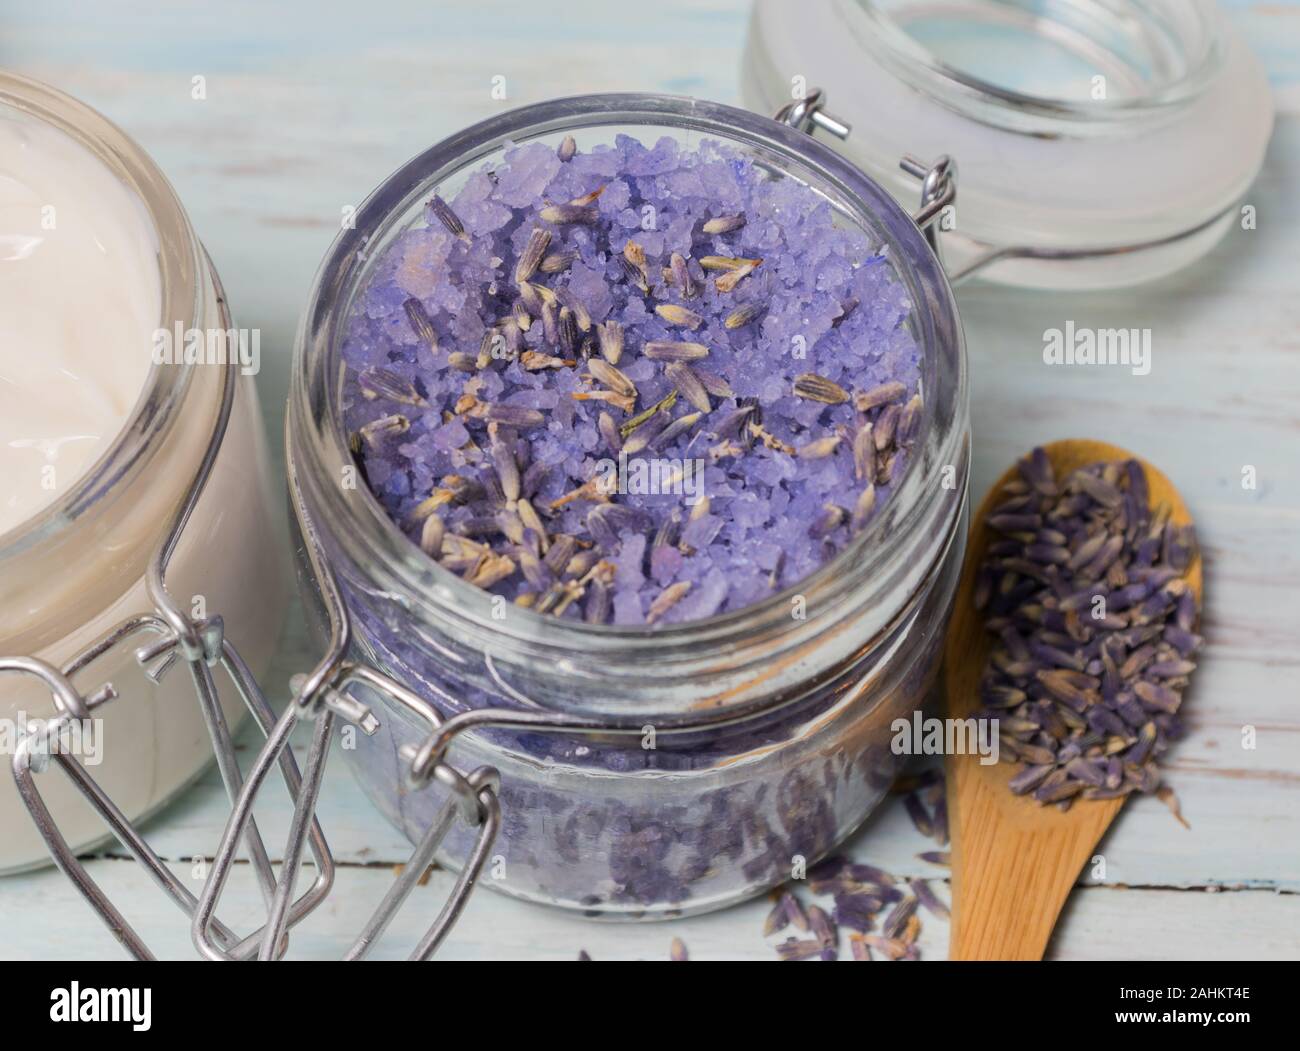 Homemade spa of lavender bath salts on a light wooden background. Cosmetics and natural medicine. Stock Photo